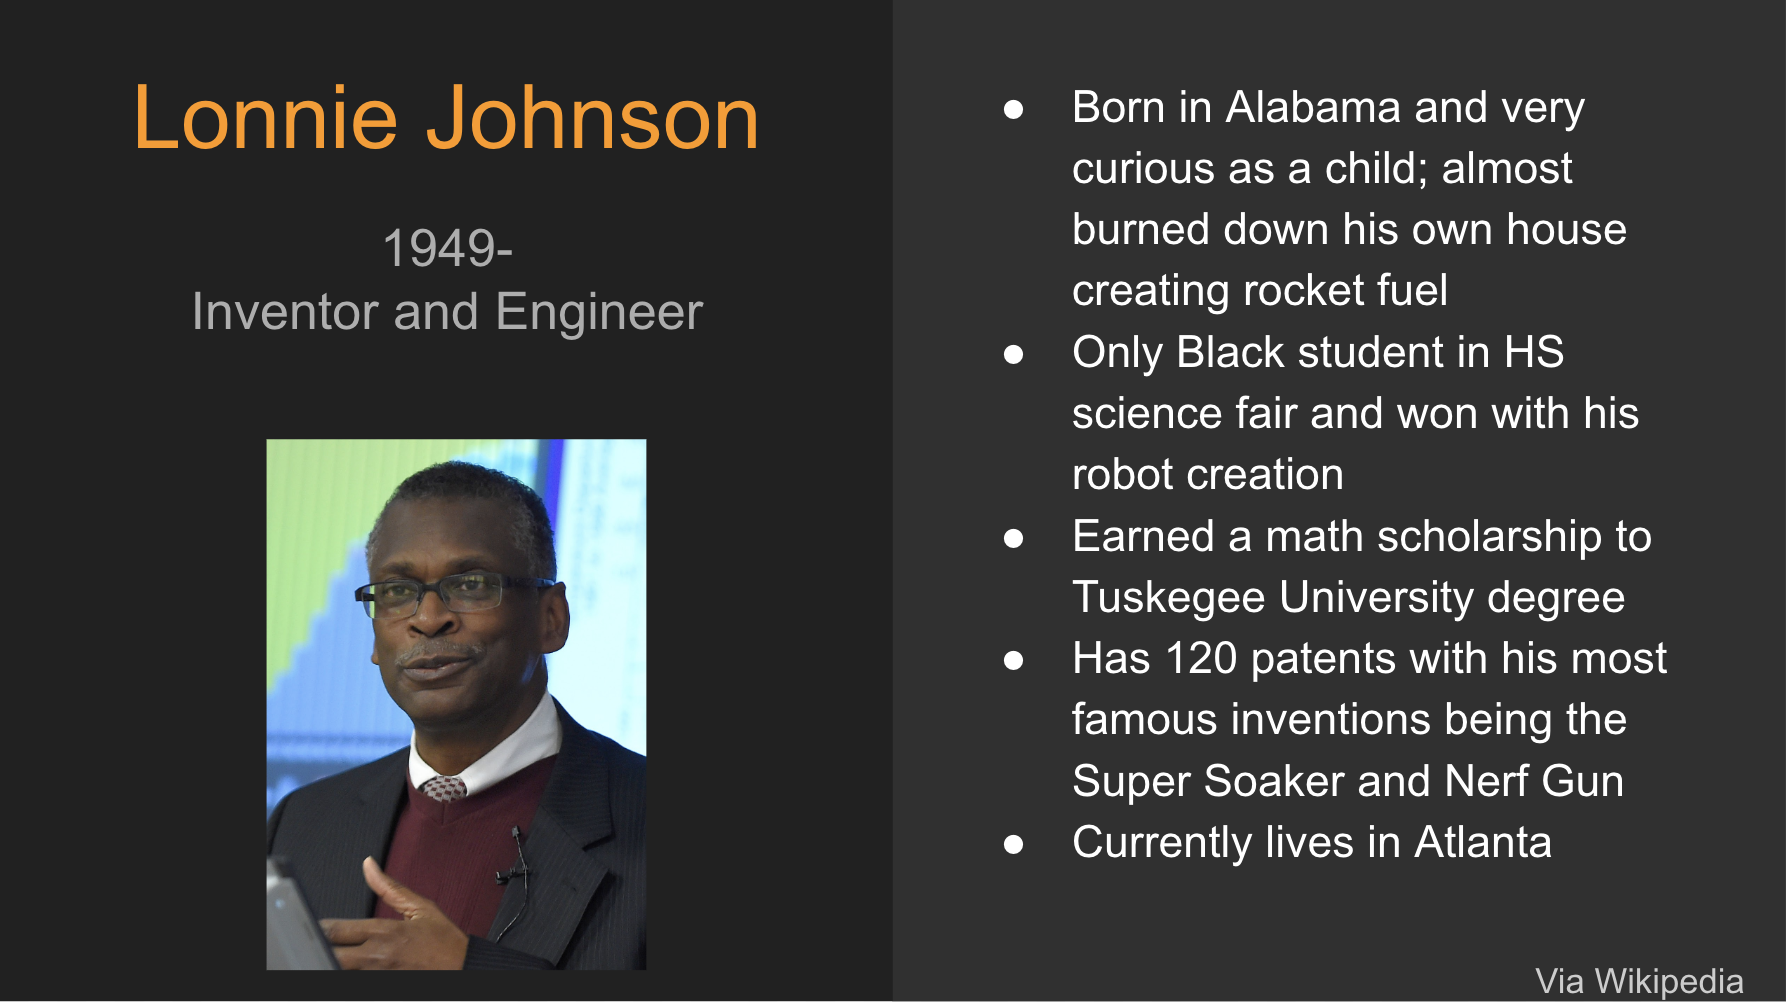 Lonnie Johnson. 1949 to Present. Inventor and Engineer. Bullet points read: born in Alabama and very curious as a child; almost burned down his own house creating rocket fuel. only black student in HS science fair and won with his robot creation. Earned a math scholarship to Tuskegee University degree. Has 120 Patents with his most famous inventions being the super soaker and Nerf Gun. Currently Lives in Atlanta. Photo of Johnson in a suit and sweater vest over a collarded shirt. He is a middle-aged black man presenting a lecture. 